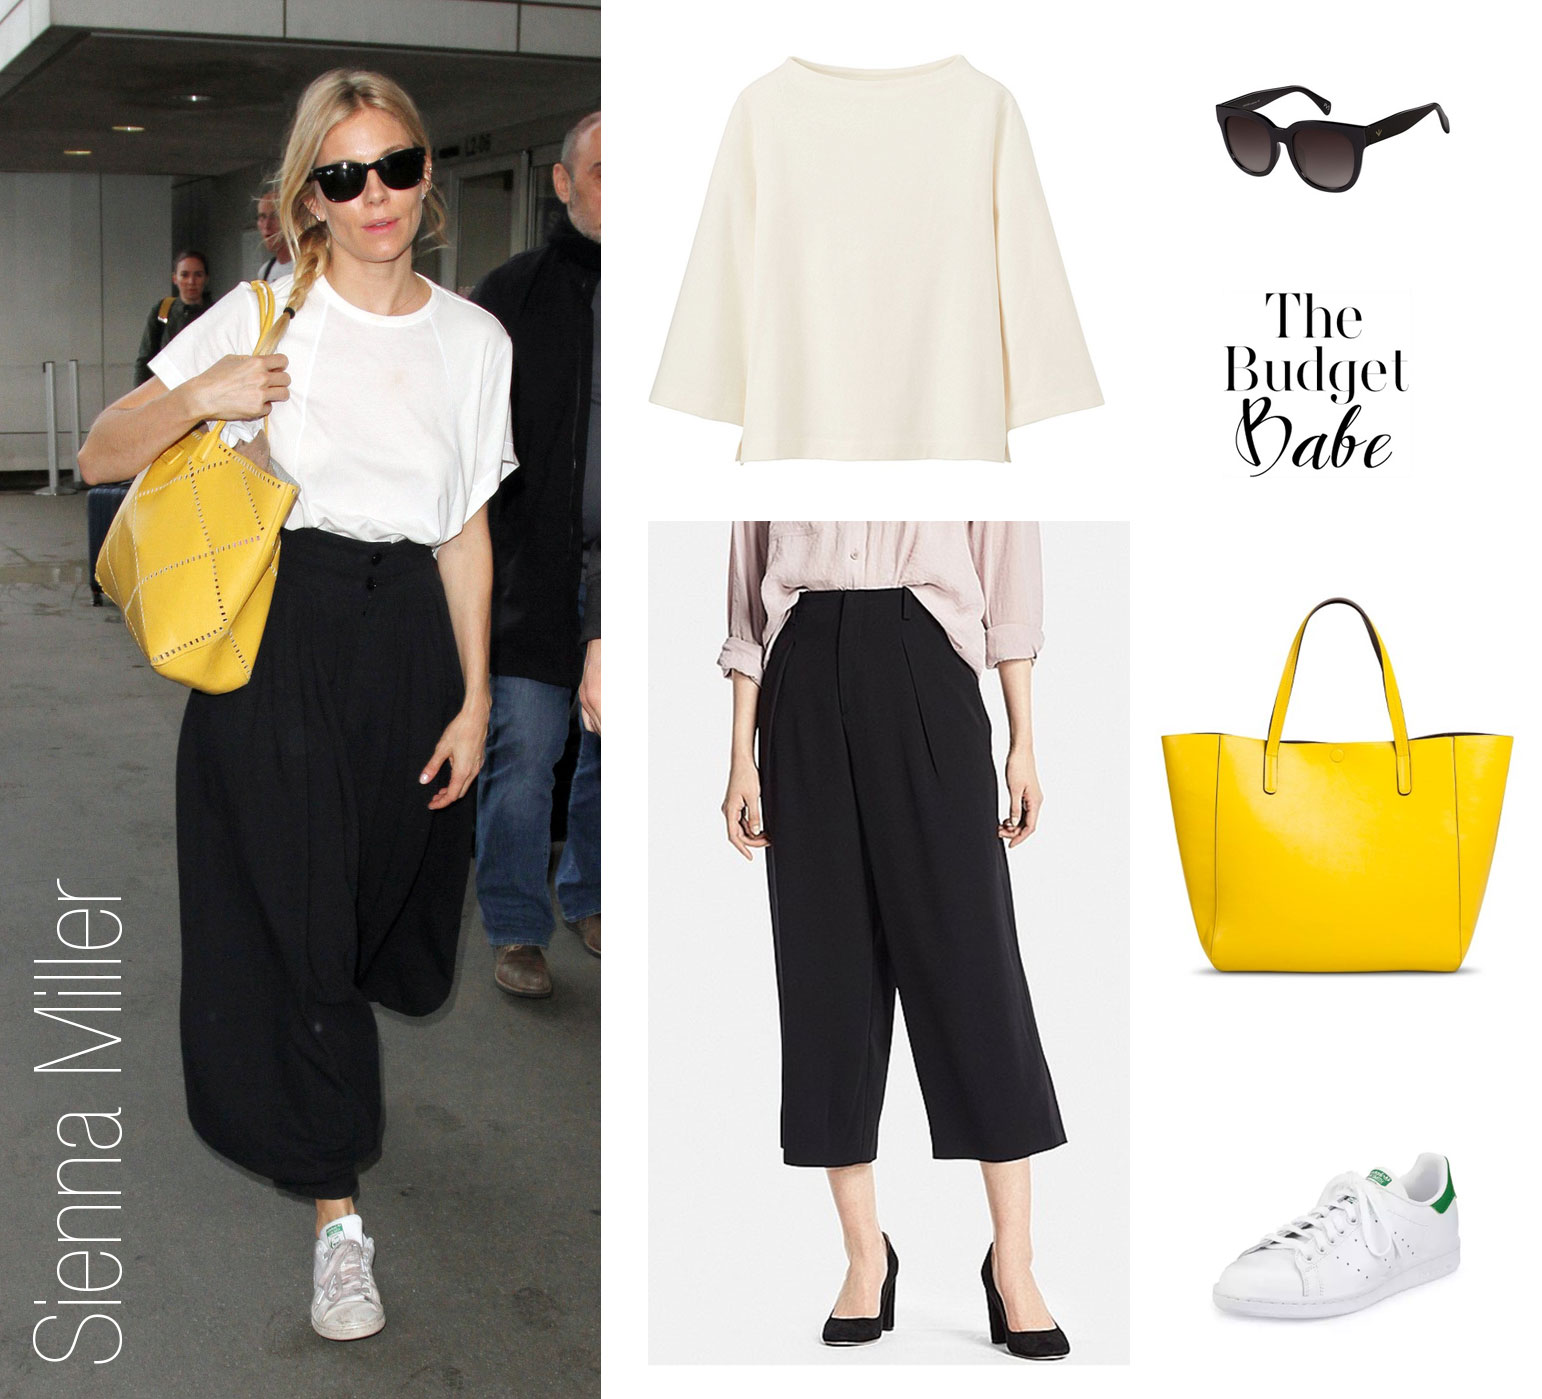 See how to recreate Sienna Miller's eclectic airport style with pieces starting at just $15.